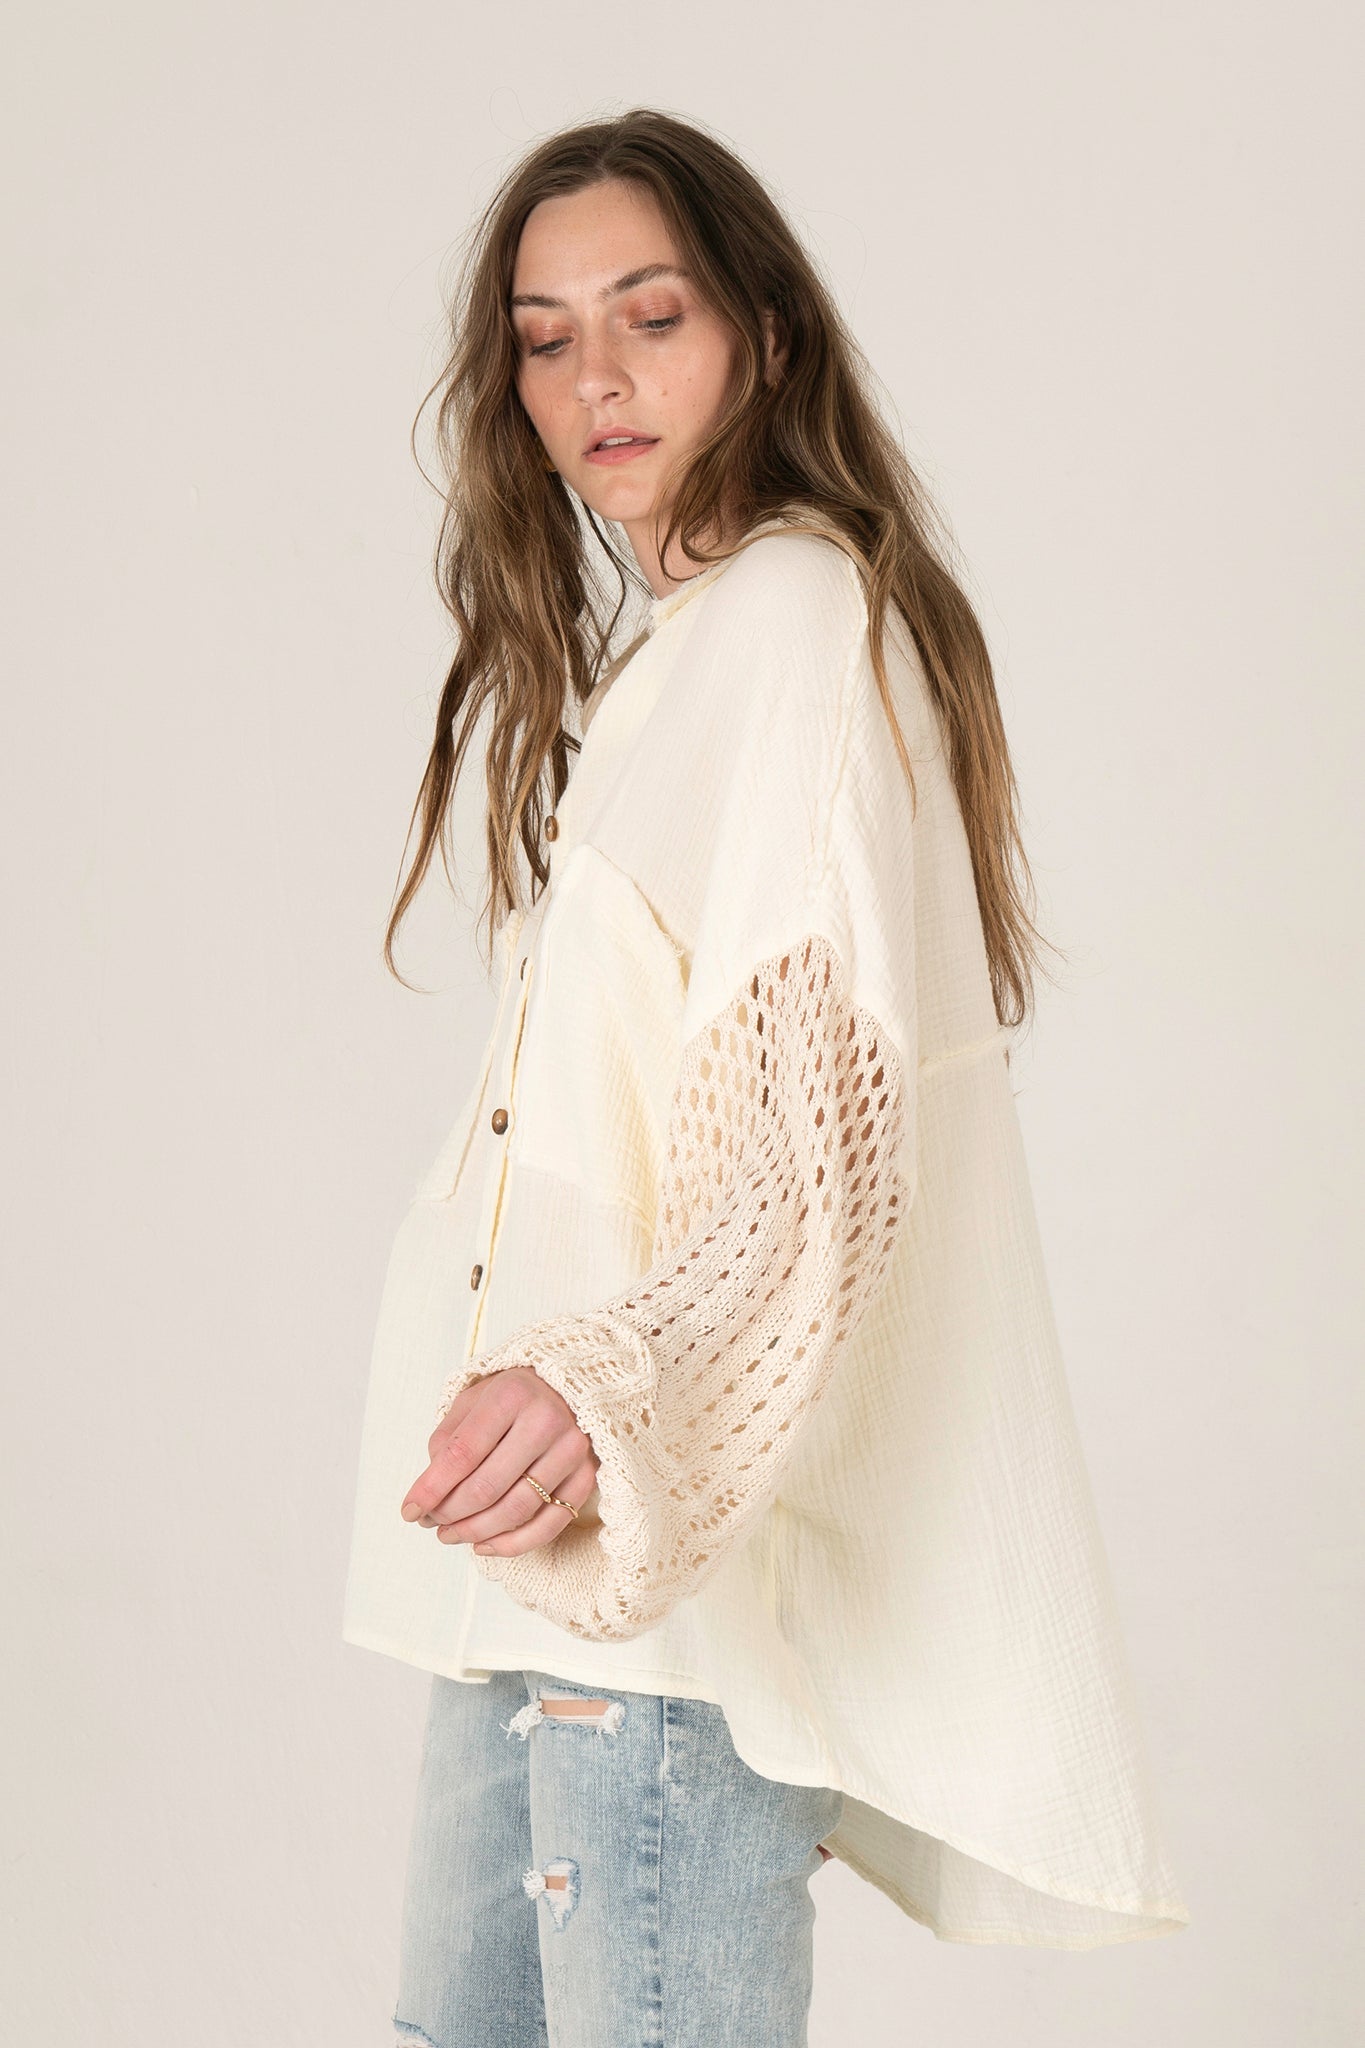 View 2 of Wisteria Cardigan in Cream, a Sweaters from Larrea Cove. Detail: .